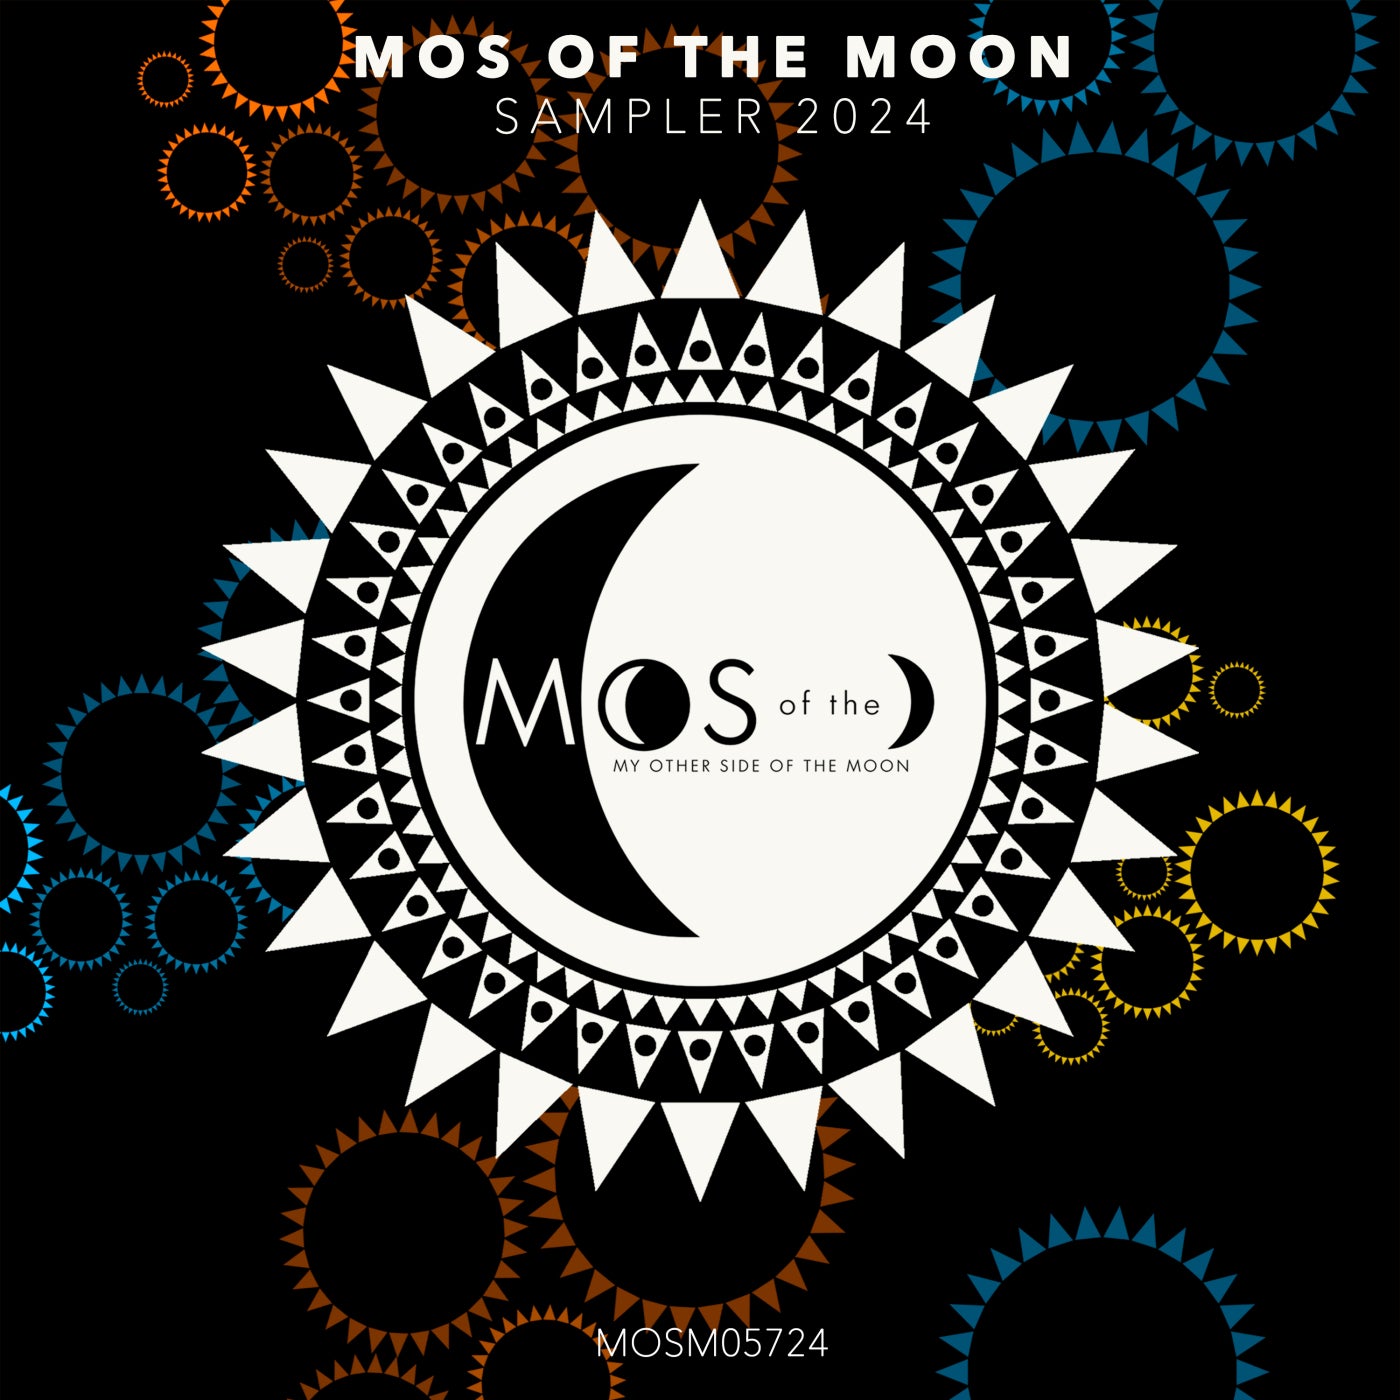 MOS OF THE MOON Sampler 2024